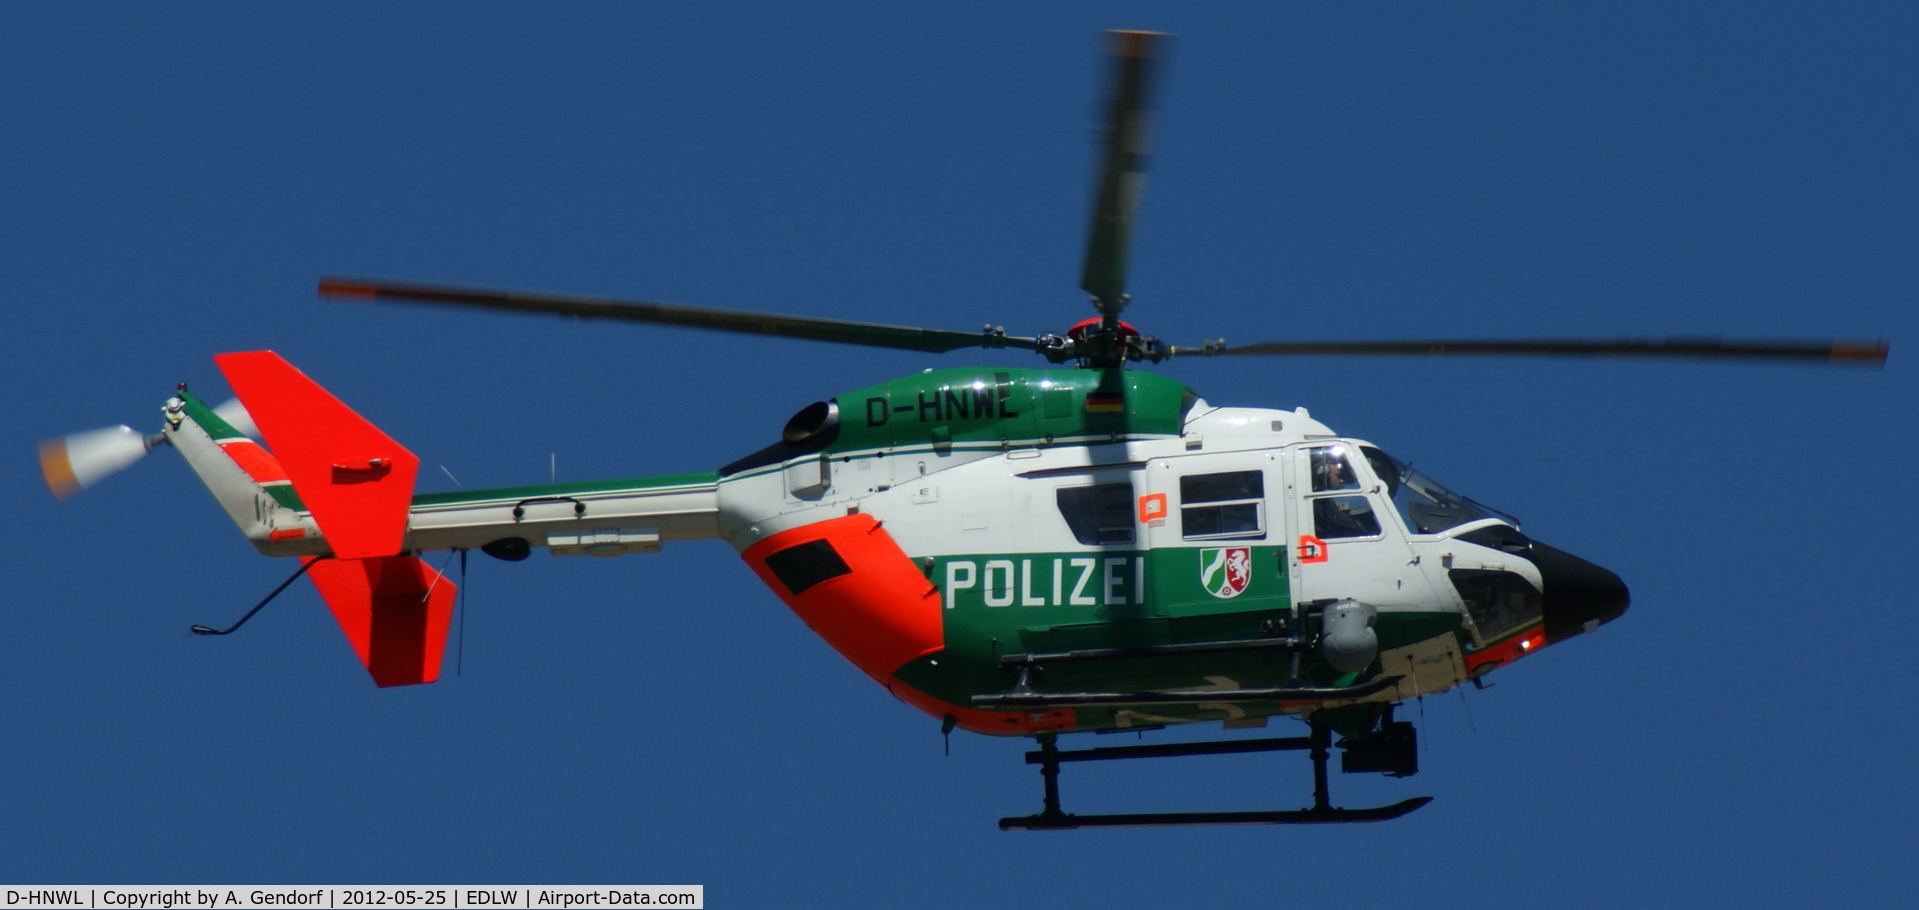 D-HNWL, Eurocopter-Kawasaki BK-117A-3 C/N 7212, Polizei, is flying back to the base at Dortmund-Wickede Airport (EDLW)